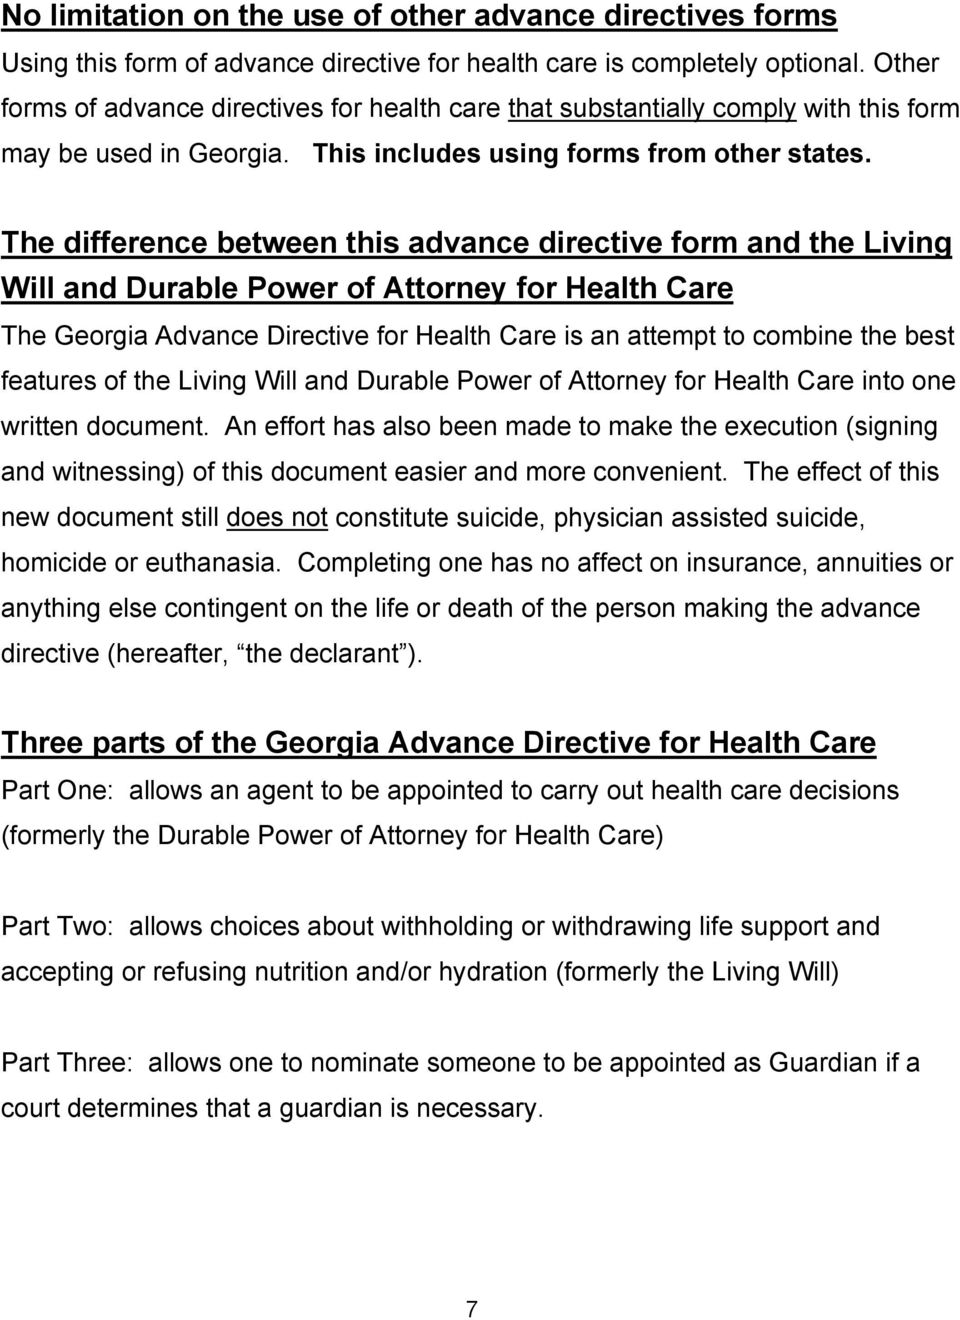 The difference between this advance directive form and the Living Will and Durable Power of Attorney for Health Care The Georgia Advance Directive for Health Care is an attempt to combine the best